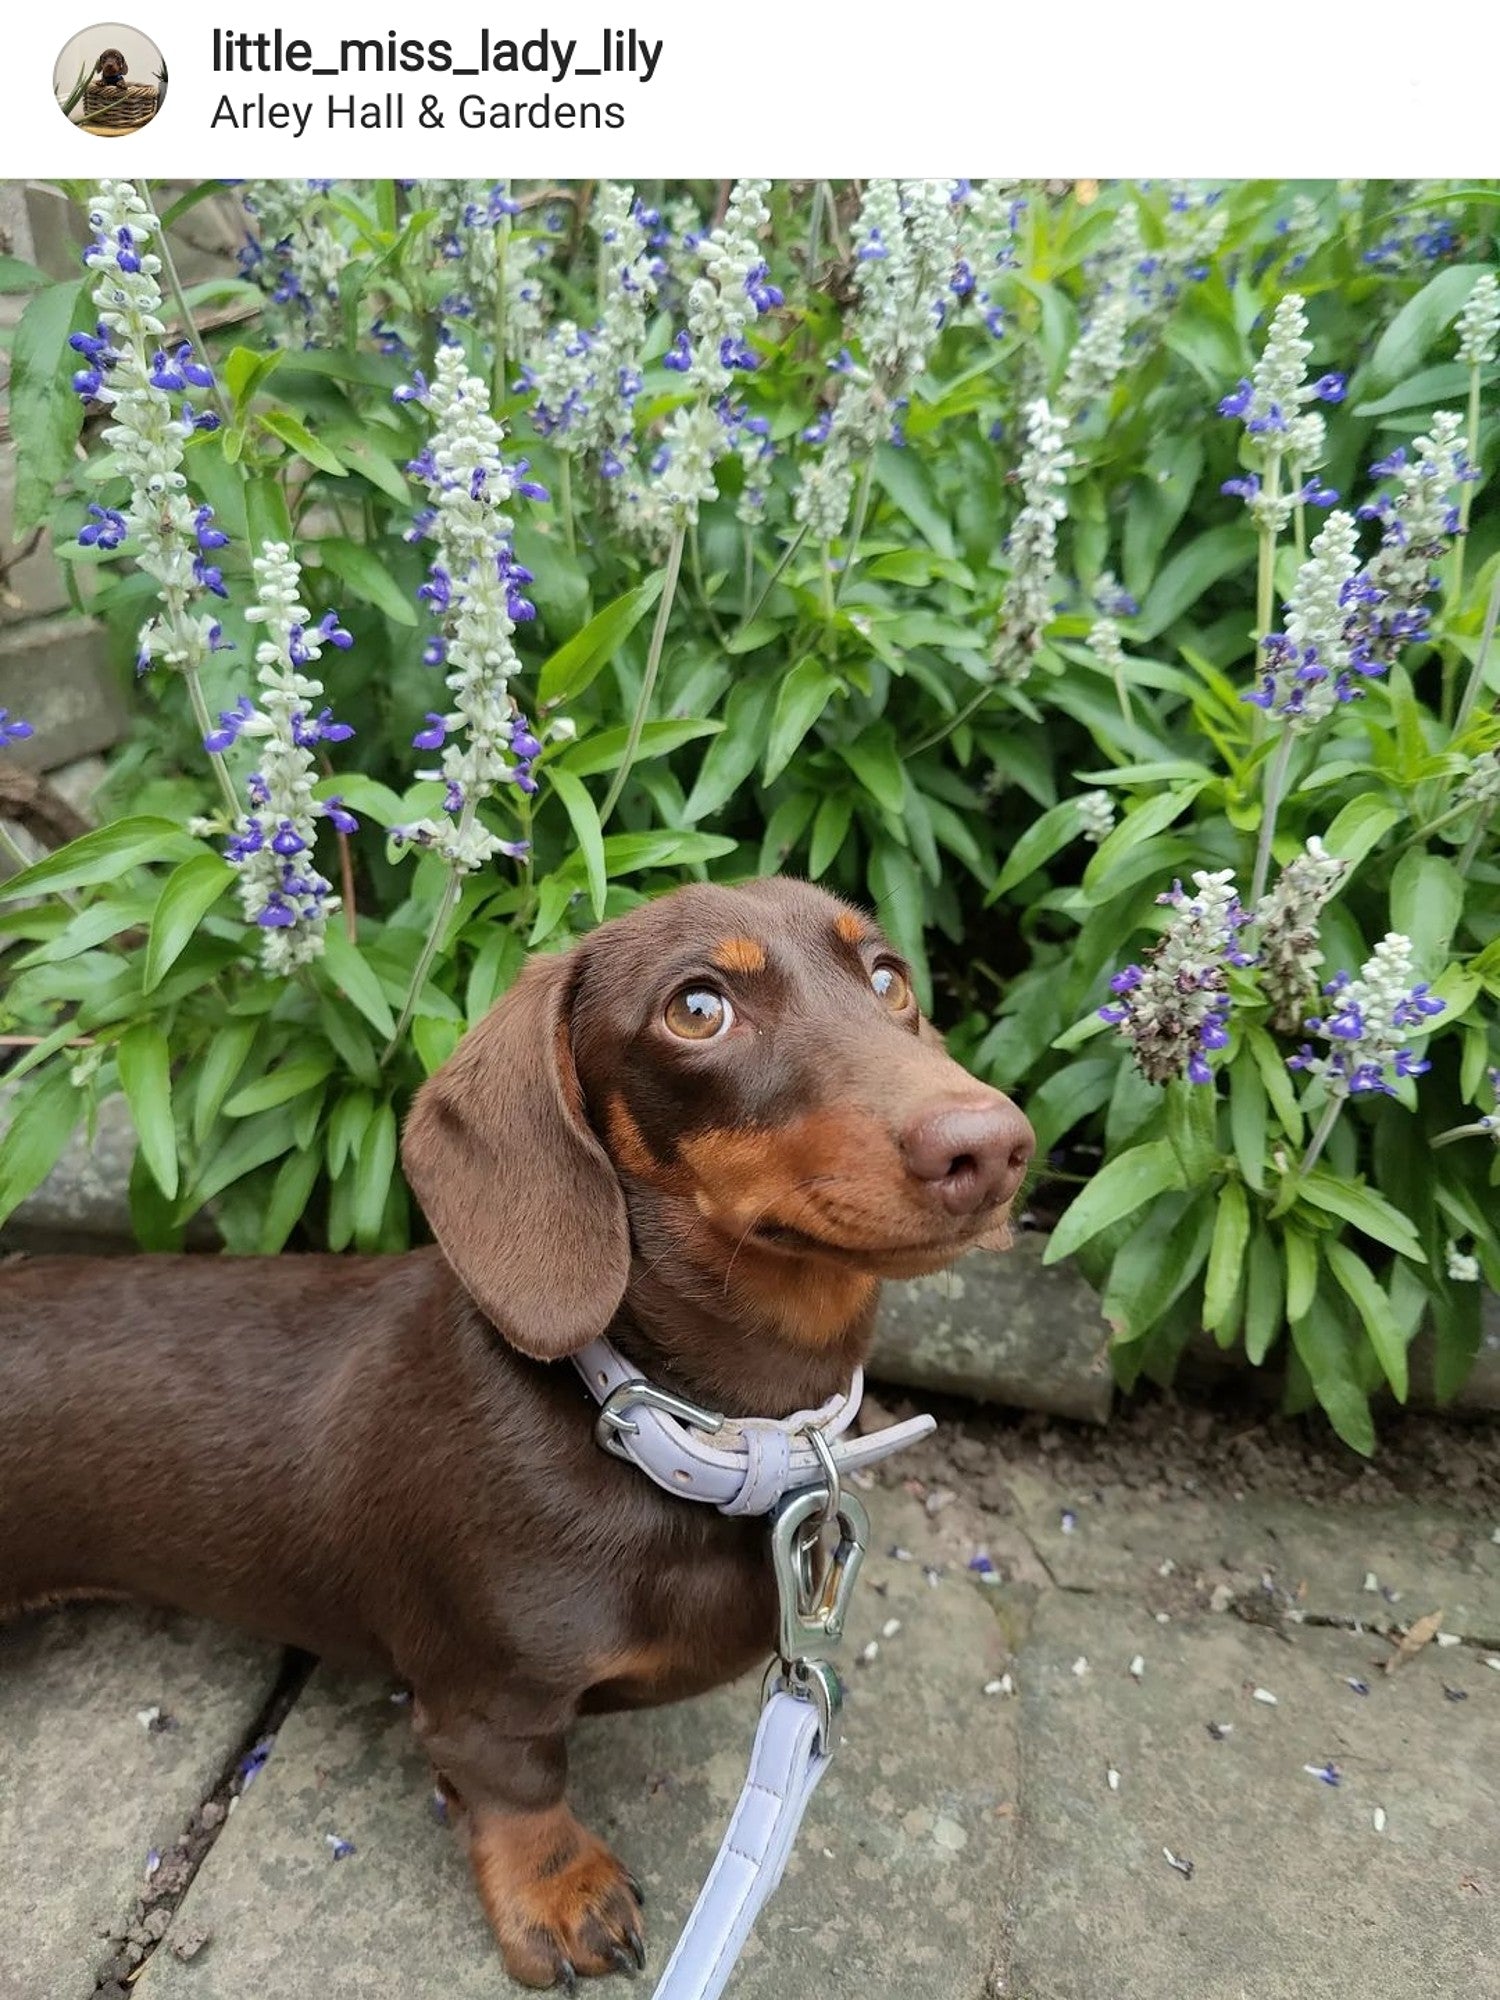 Matching Dachshund Lead and Collar worn by Lily the Dachshund (via Instagram)